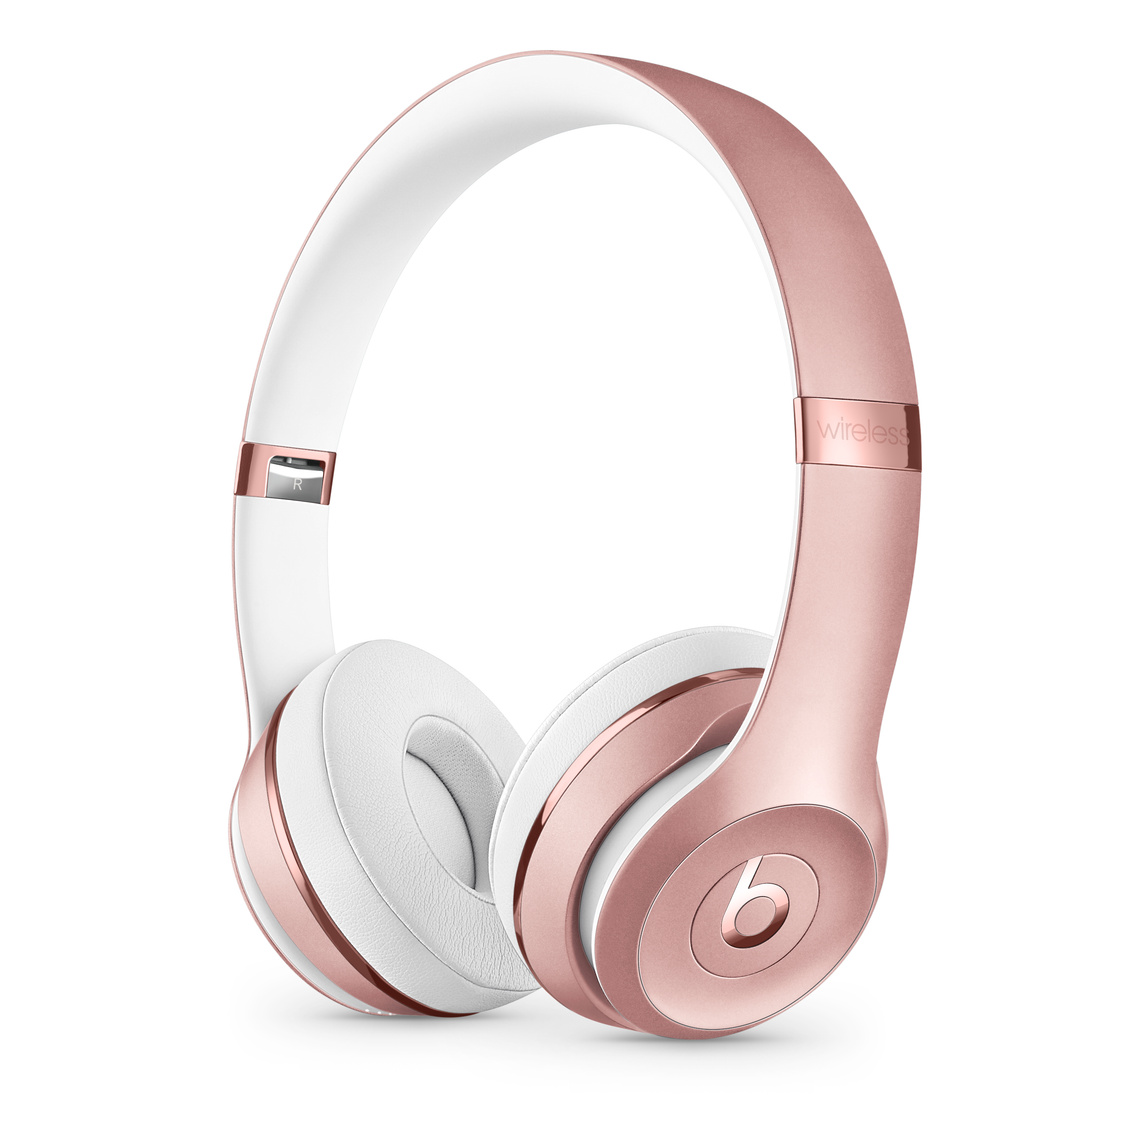  - Audifono On Ear bluetooth Solo 3 Beats Rose Gold 1